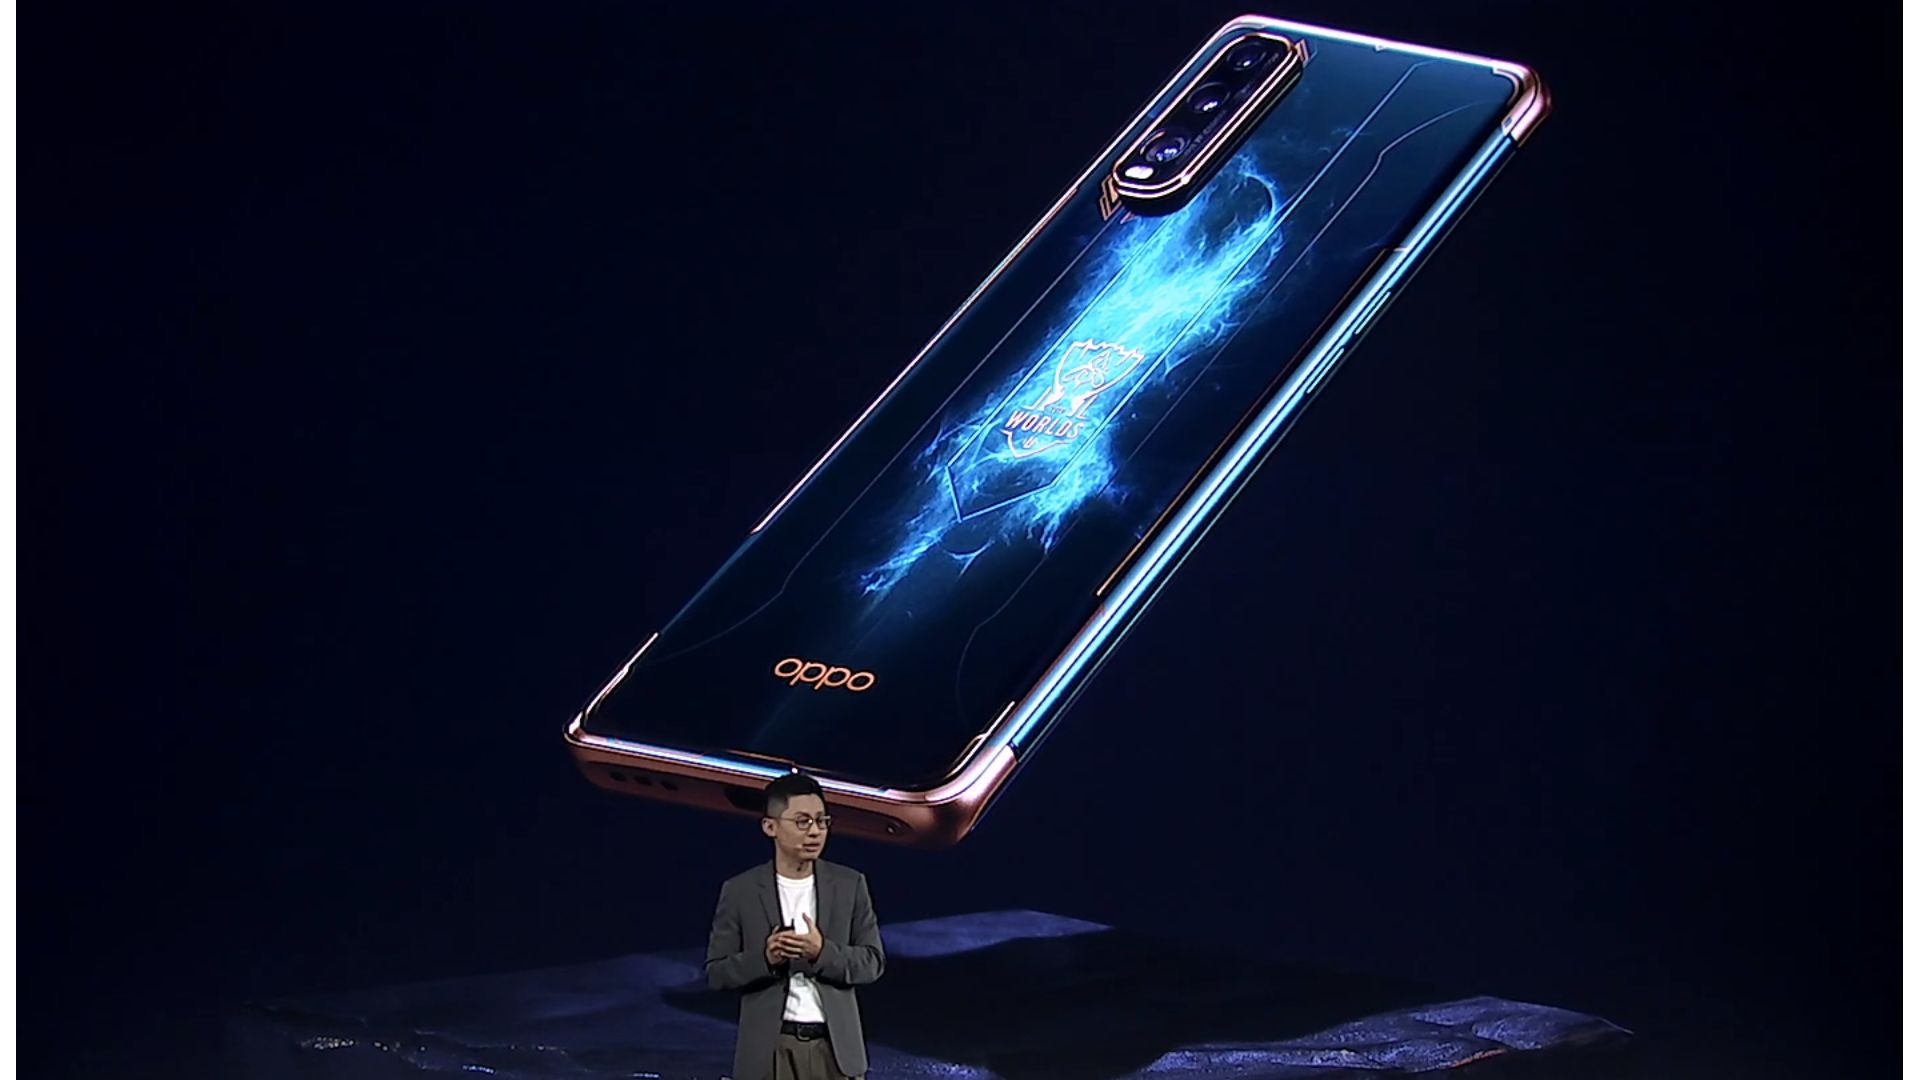 Oppo find x2. Oppo find x2 League of Legends s10 Limited Edition. Оппо 10. Oppo find x2 League. Oppo find x2 League of Legends.